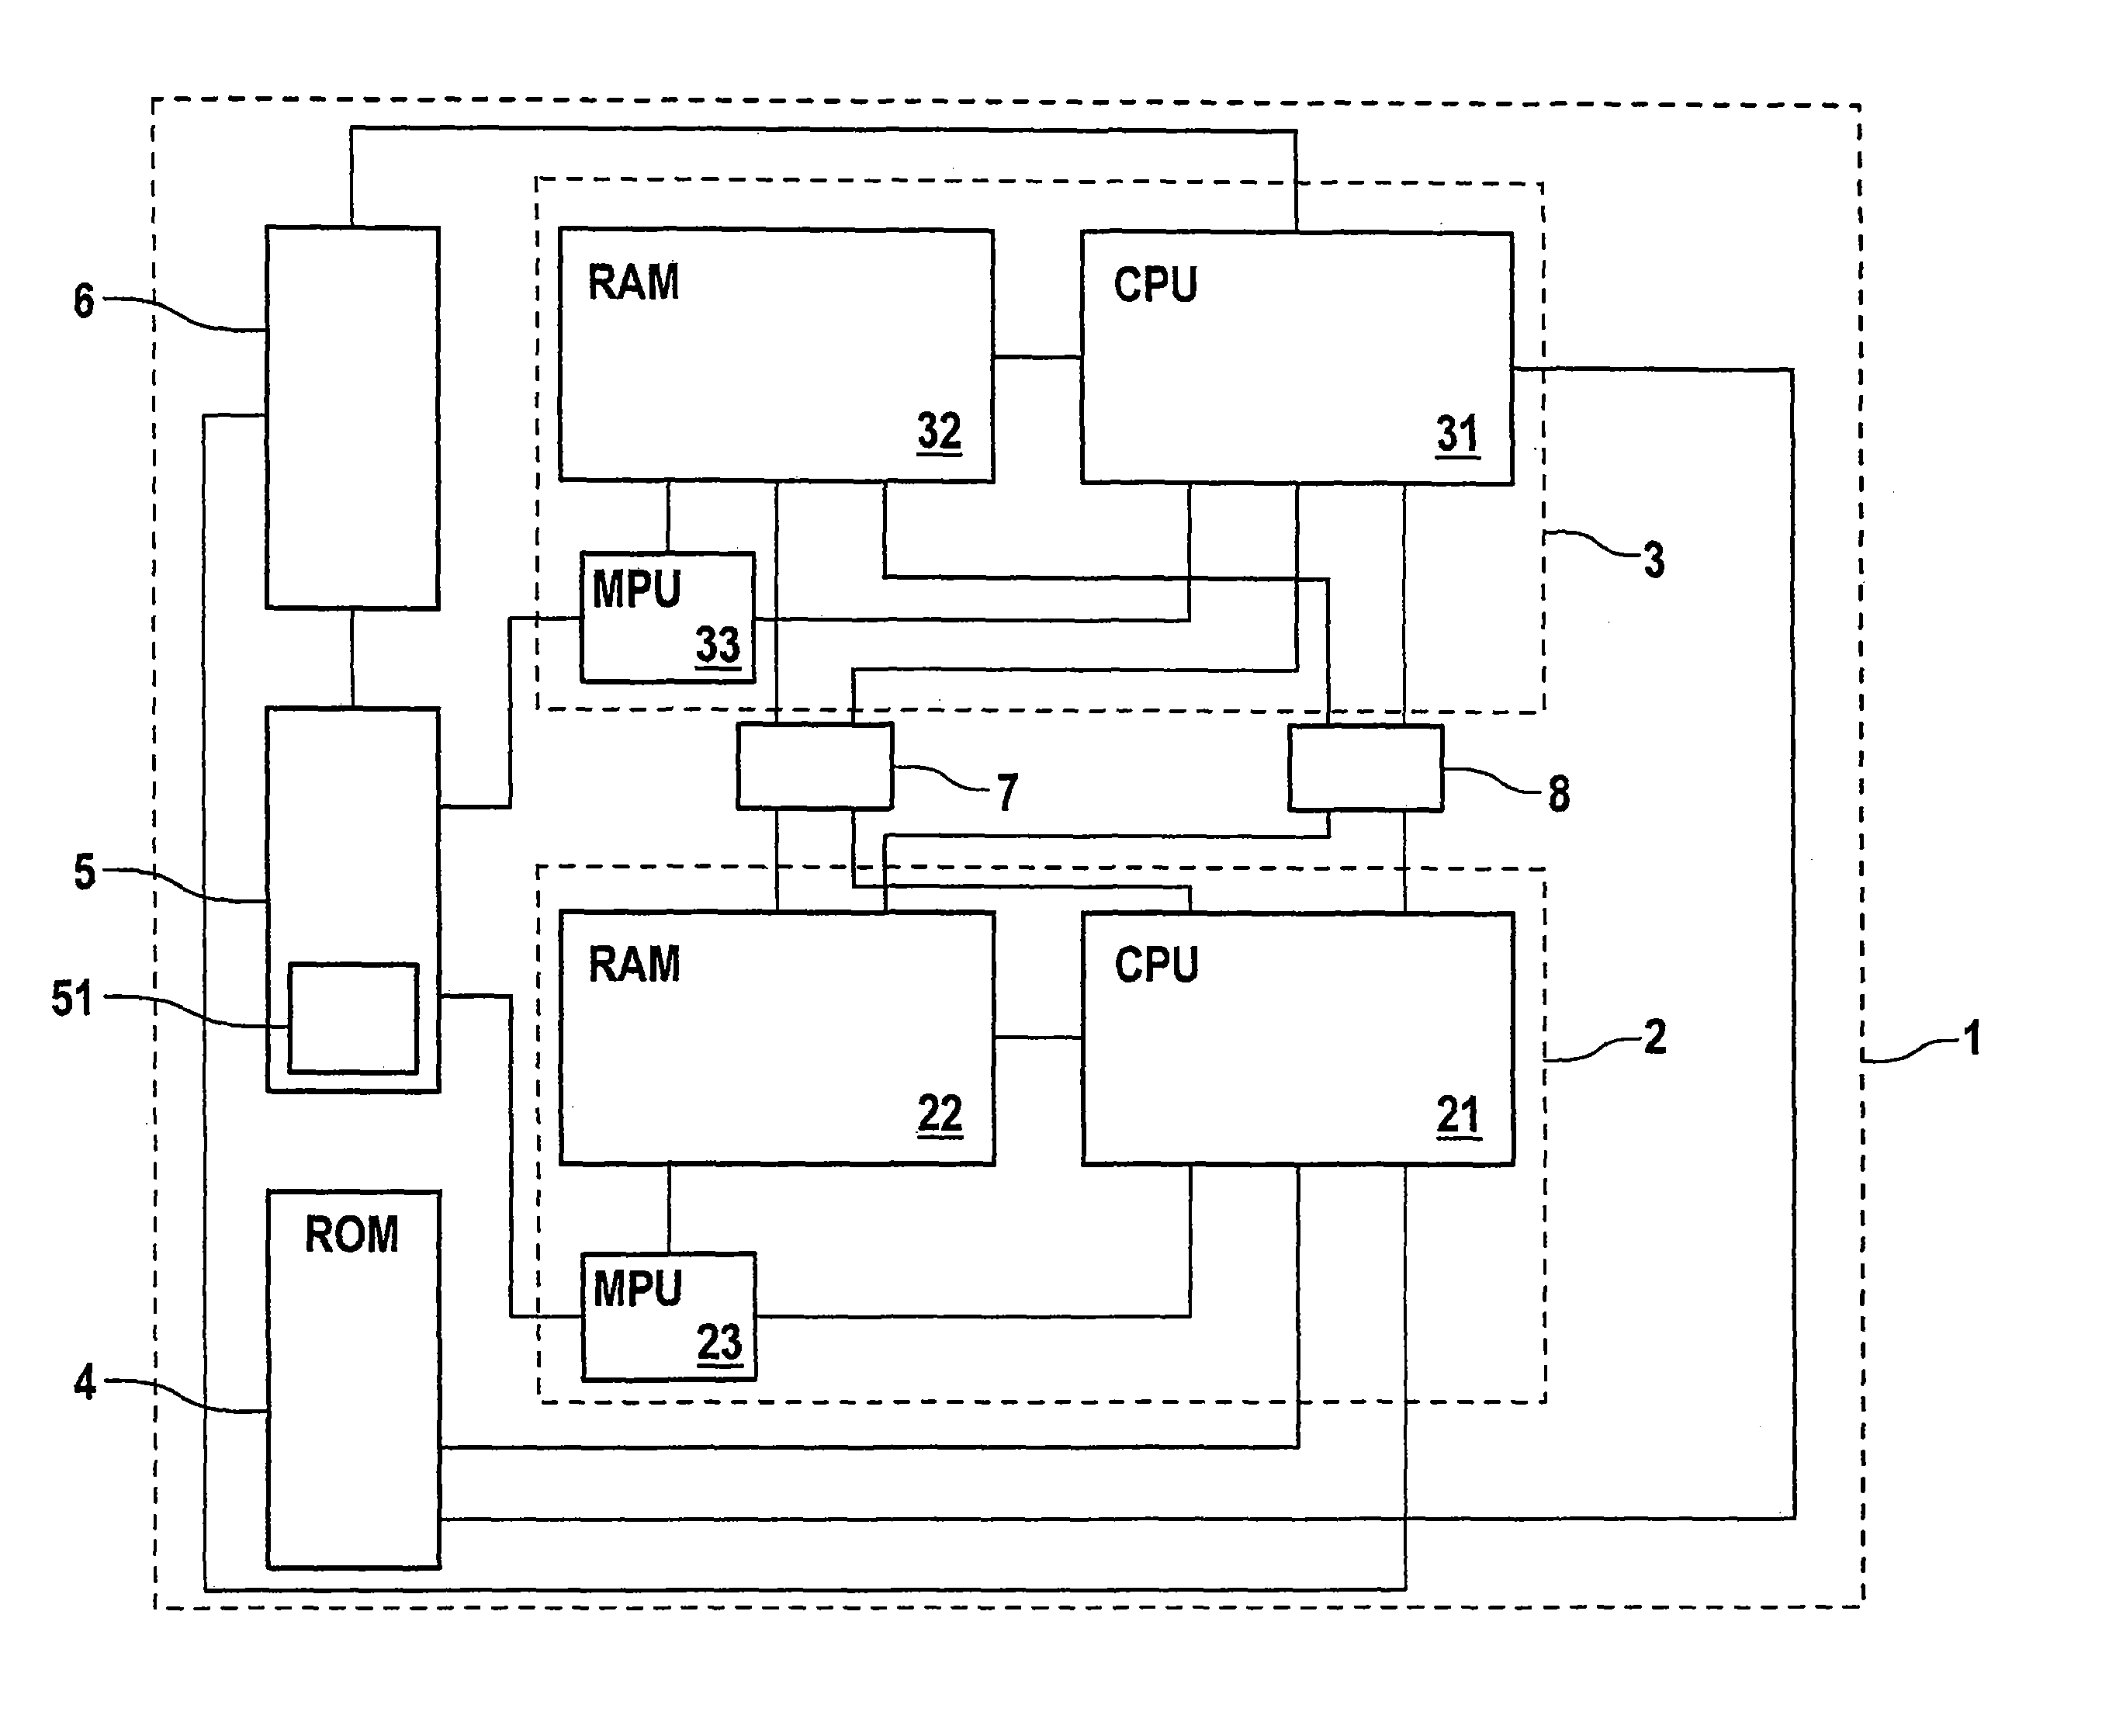 Integrated microprocessor system for safety-critical control systems including a main program and a monitoring program stored in a memory device